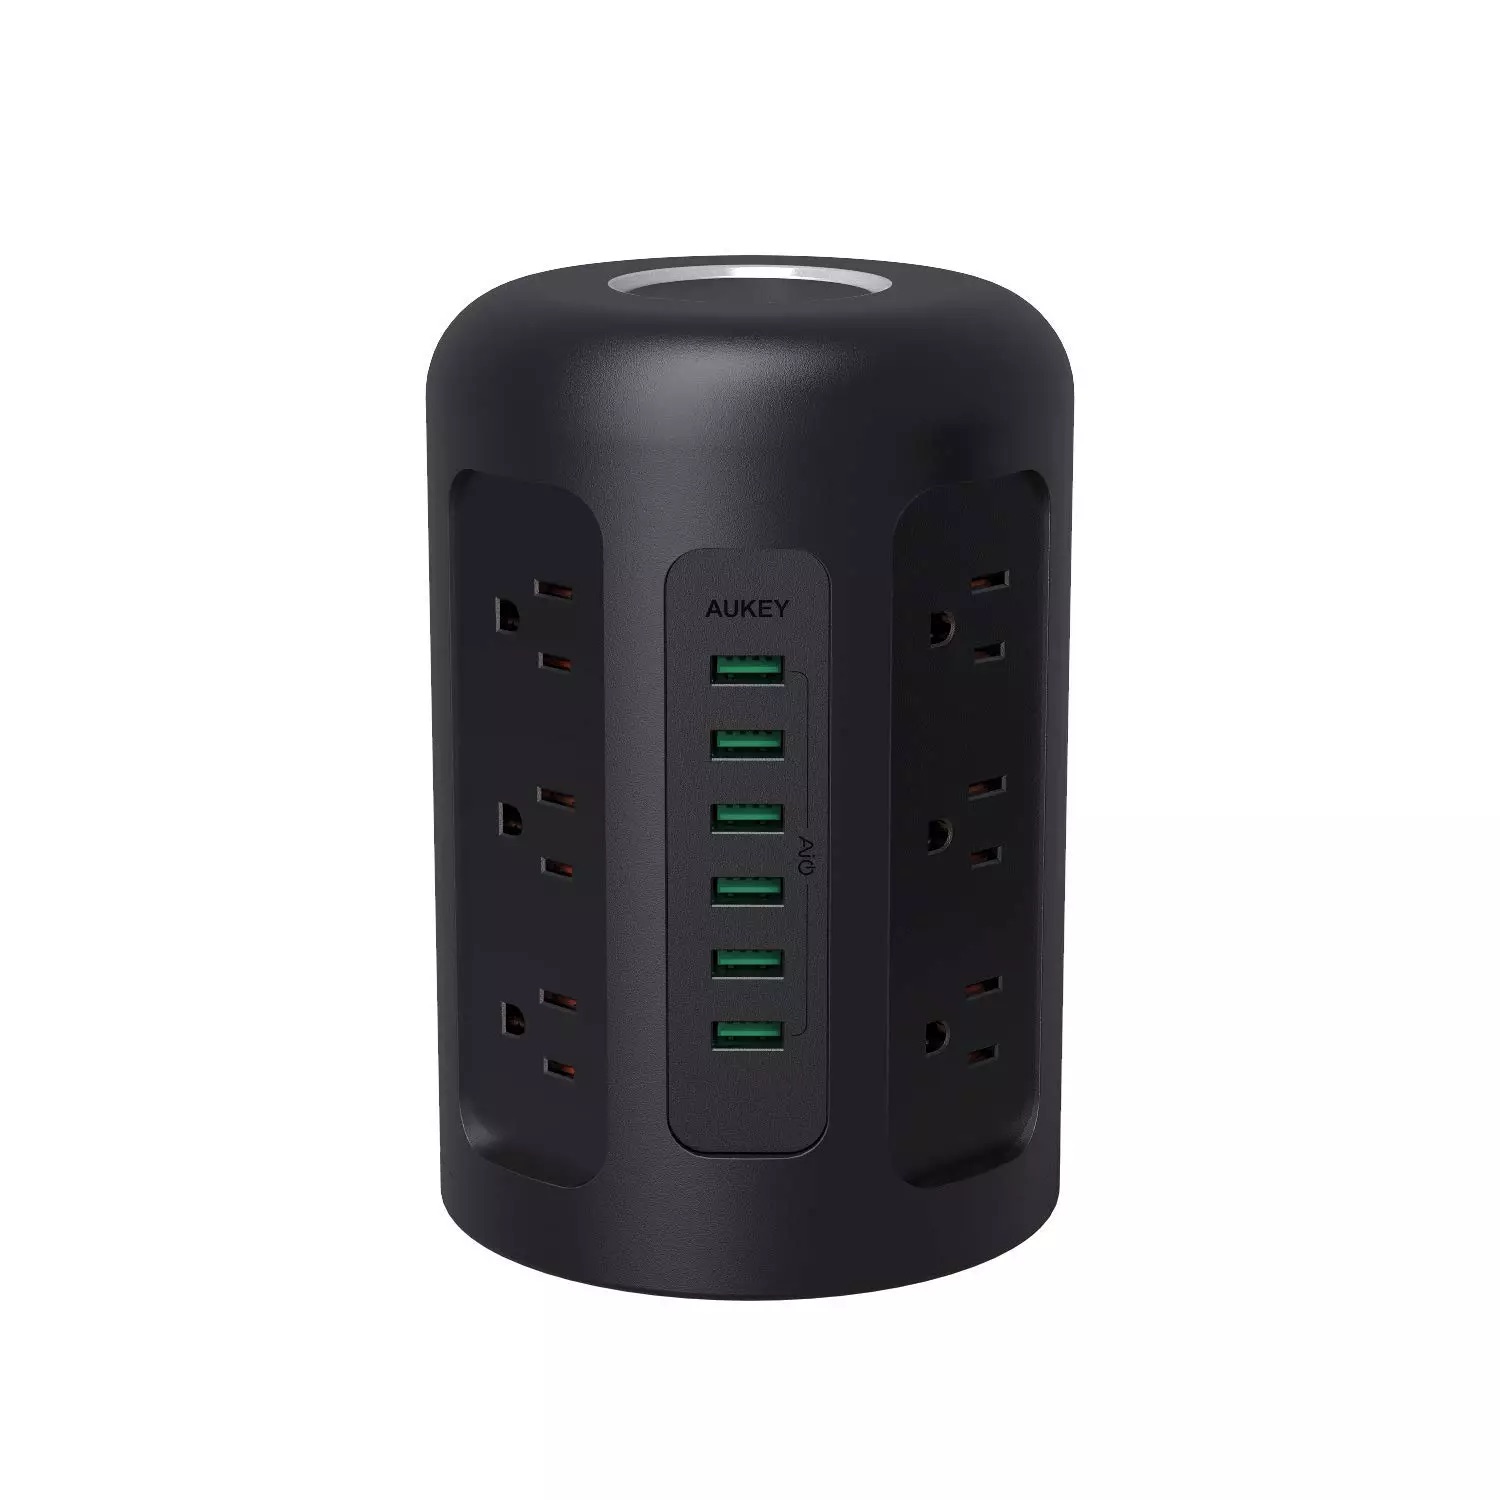 11 Best Aukey Surge Protector for 2023